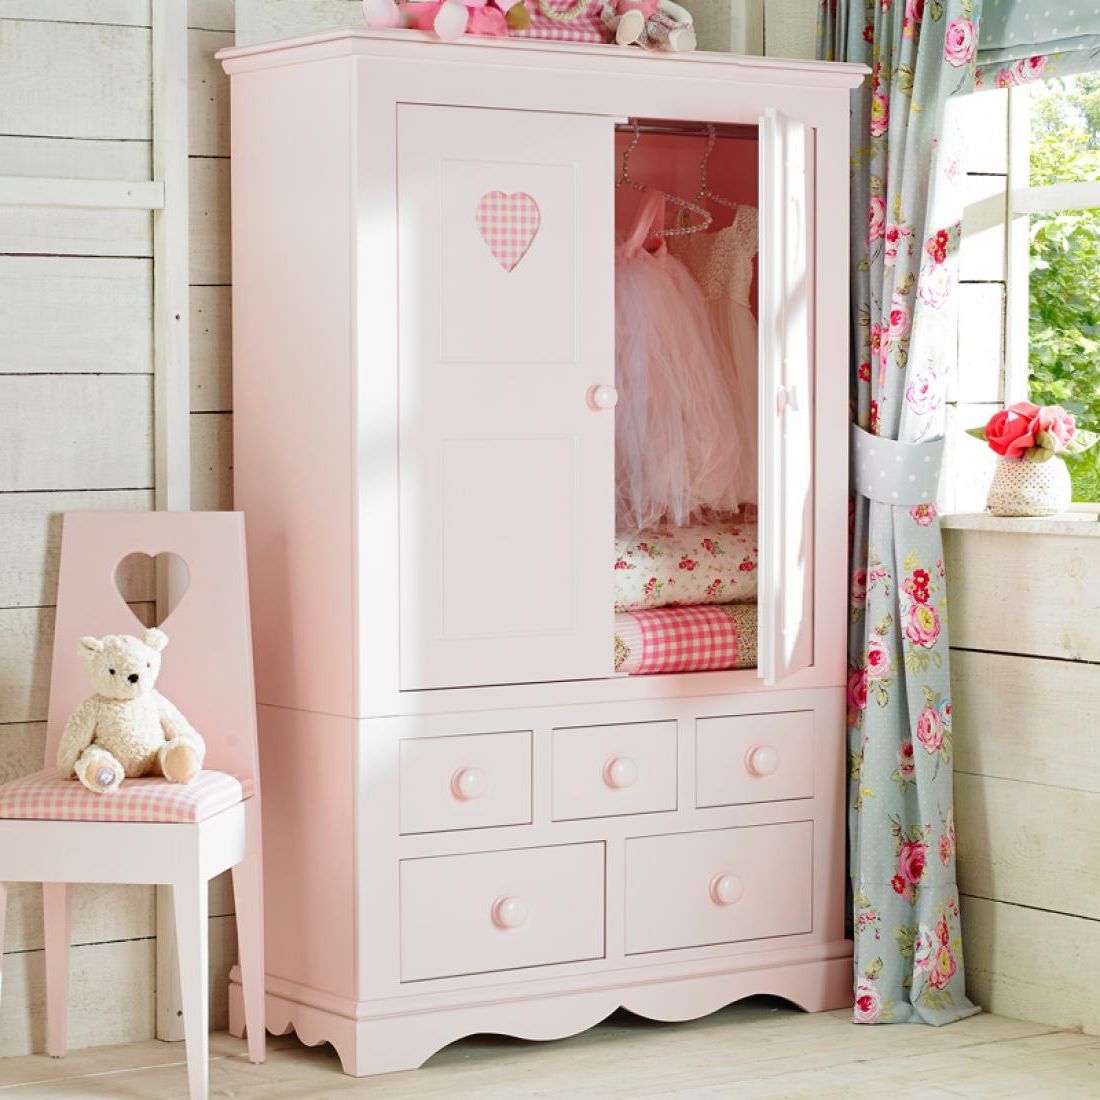 Looby Lou Combination Wardrobe | Childrens Wardrobe | Girls Wardrobe For Childrens Double Rail Wardrobes (Gallery 15 of 20)